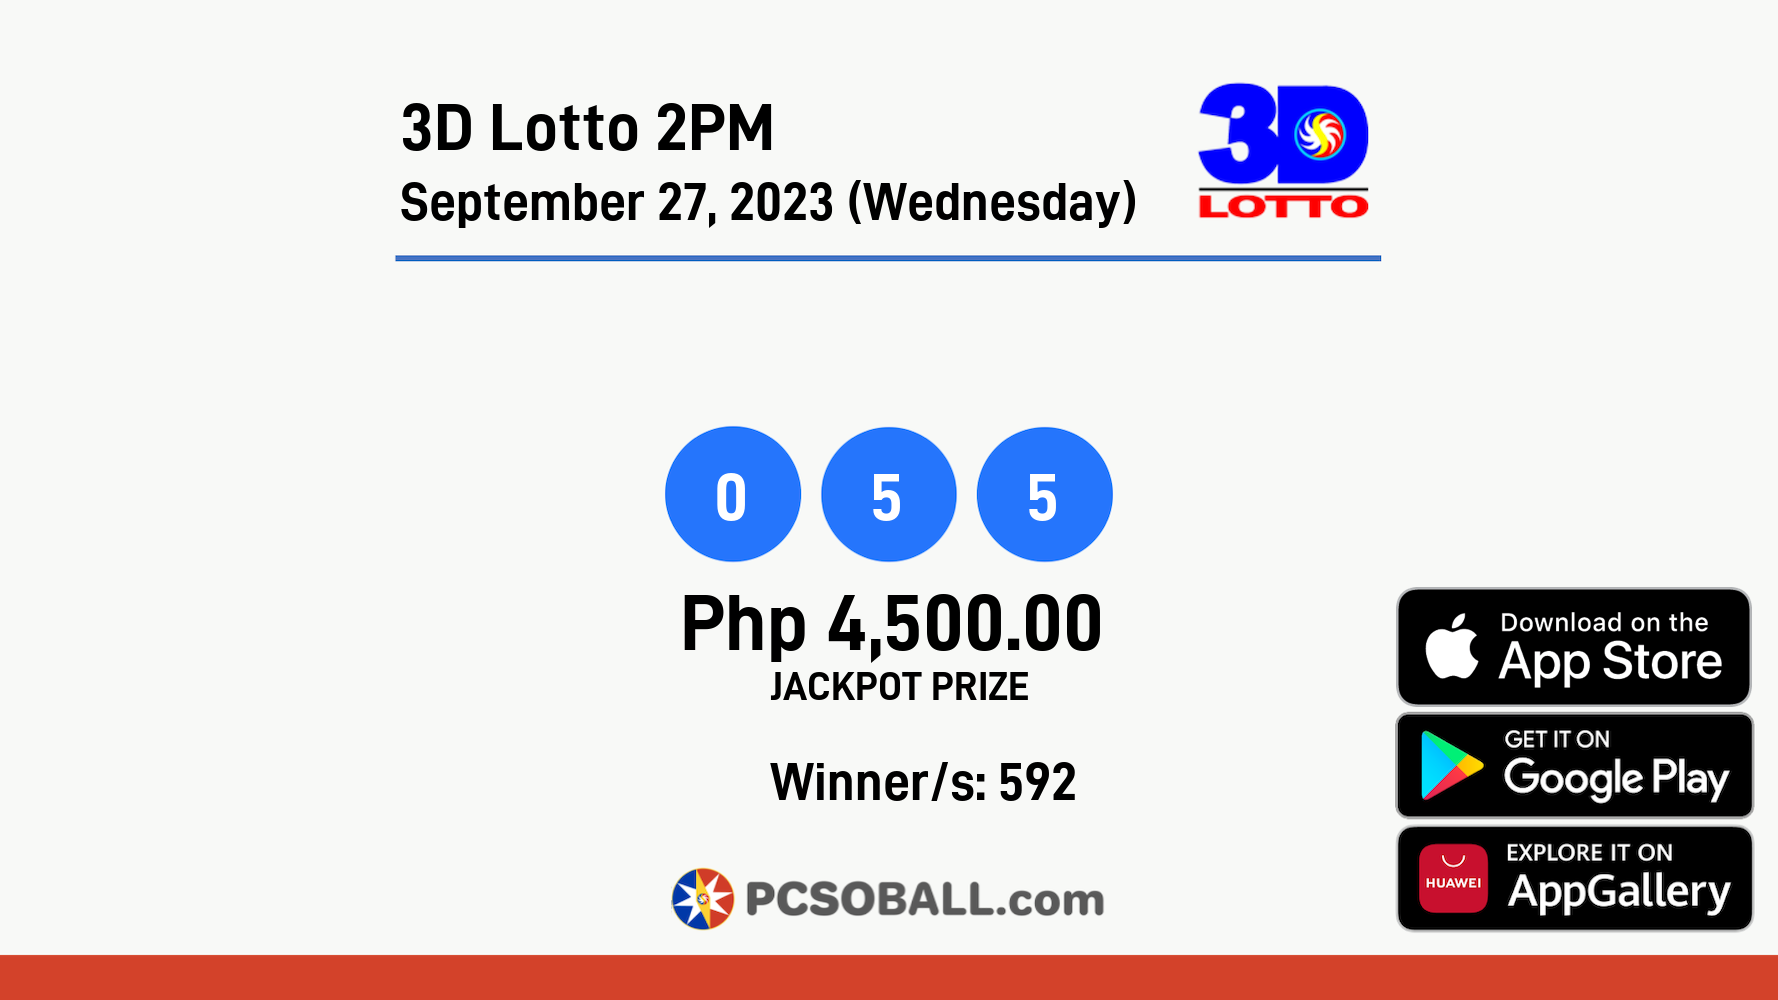 3D Lotto 2PM September 27, 2023 (Wednesday) Result